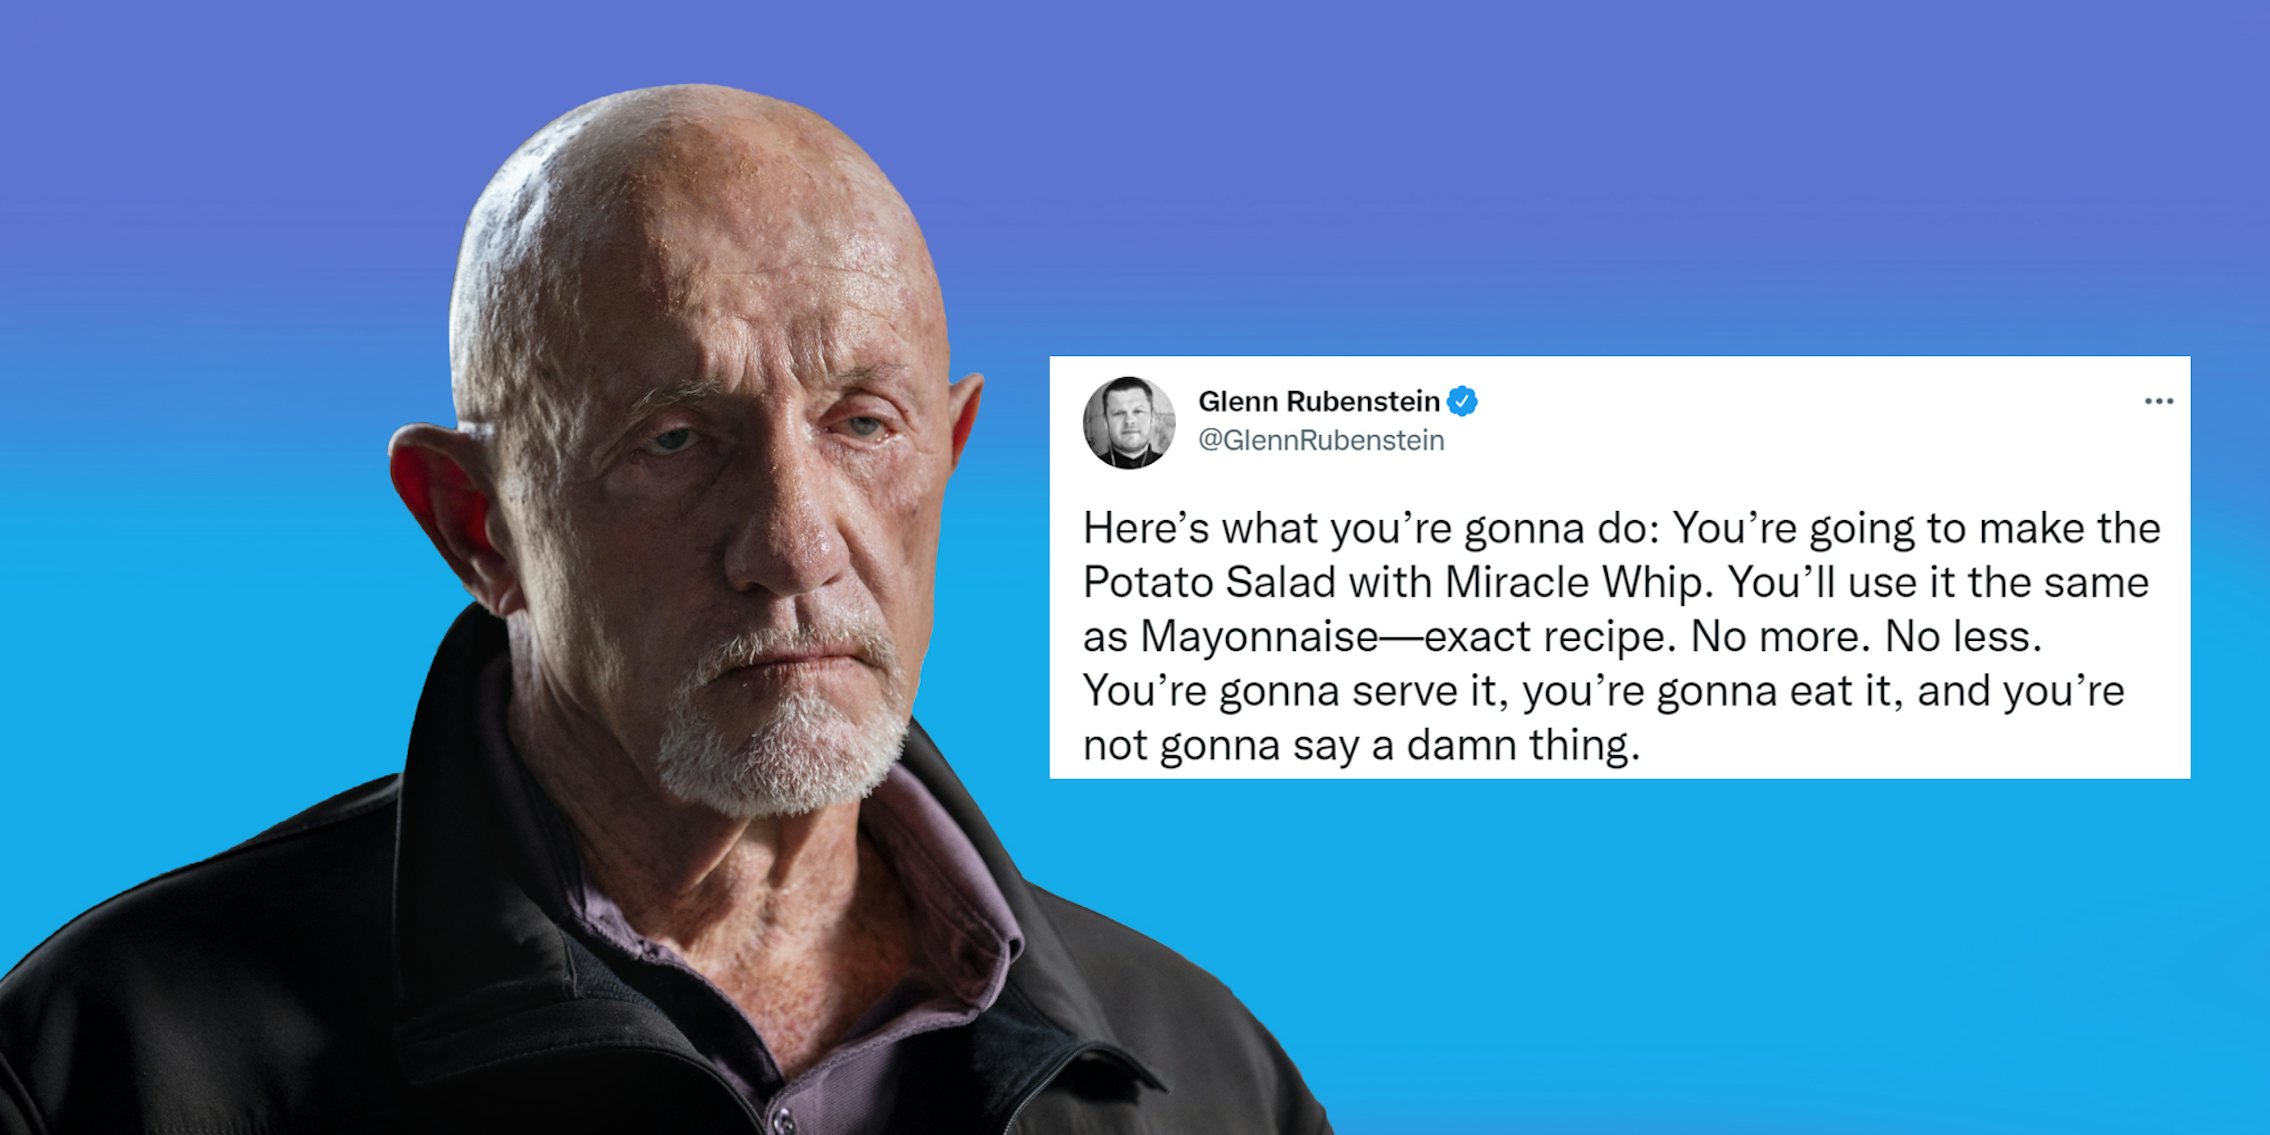 're gonna do Mike Ehrmantraut on blue background with Tweet by Glenn Rubenstein on right caption 'Here's what you're gonna do: You're going to make the Potato Salad with Miracle Whip. You'll use it the same as Mayonnaise-exact recipe. No more. No less. You're gonna serve it, you're gonna eat it, and you're not gonna say a damn thing.'